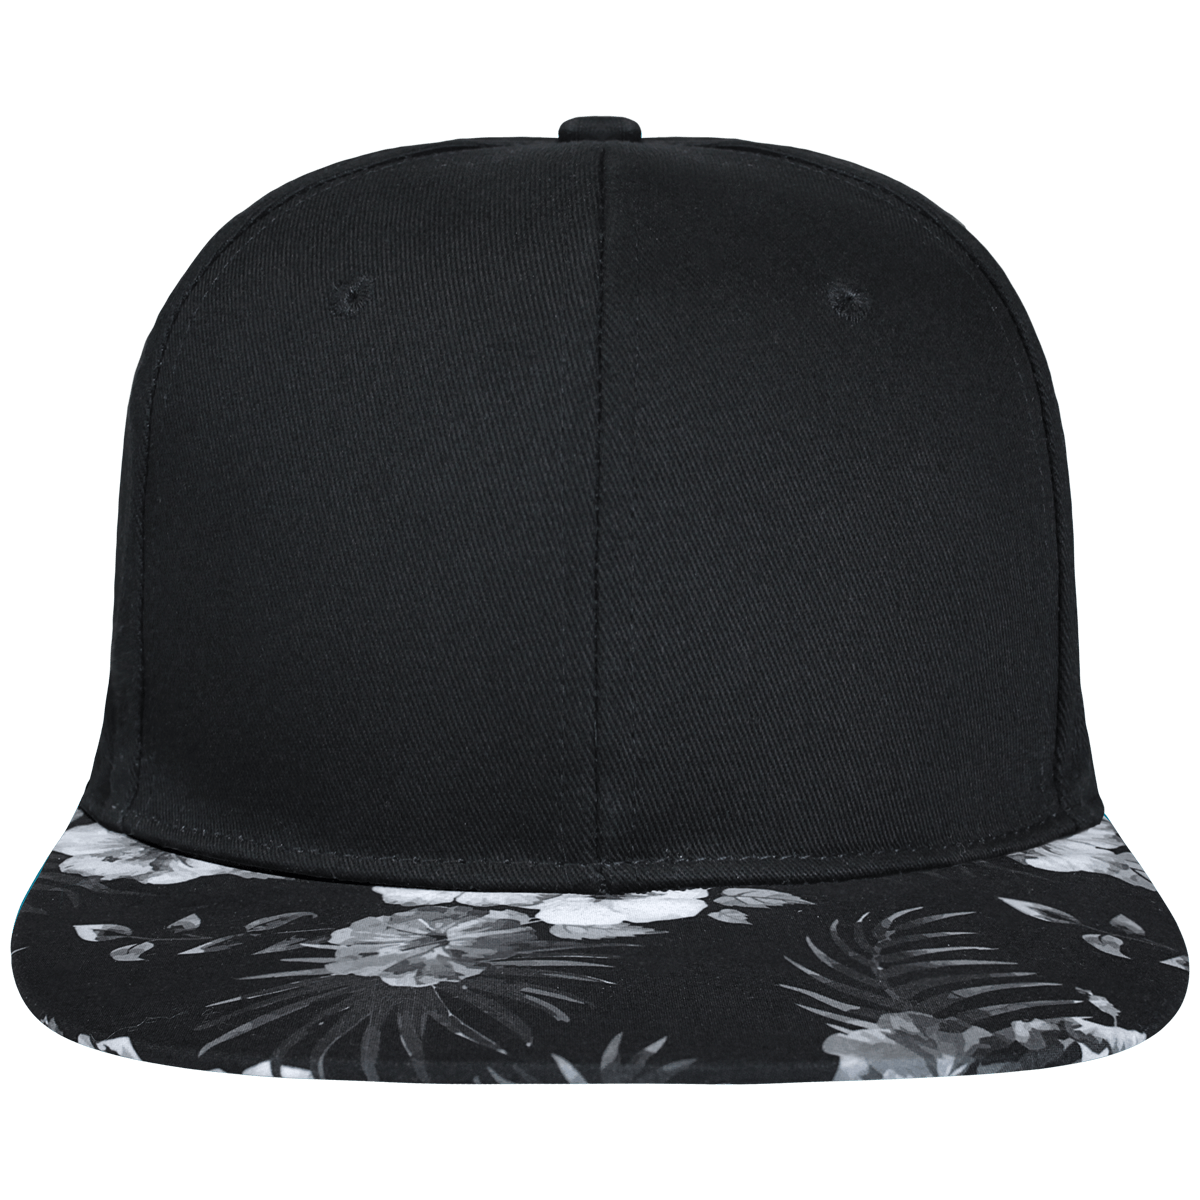 pictoSnapback Visor With Black Hawaiian Flower Graphic Motifs To Customize: 